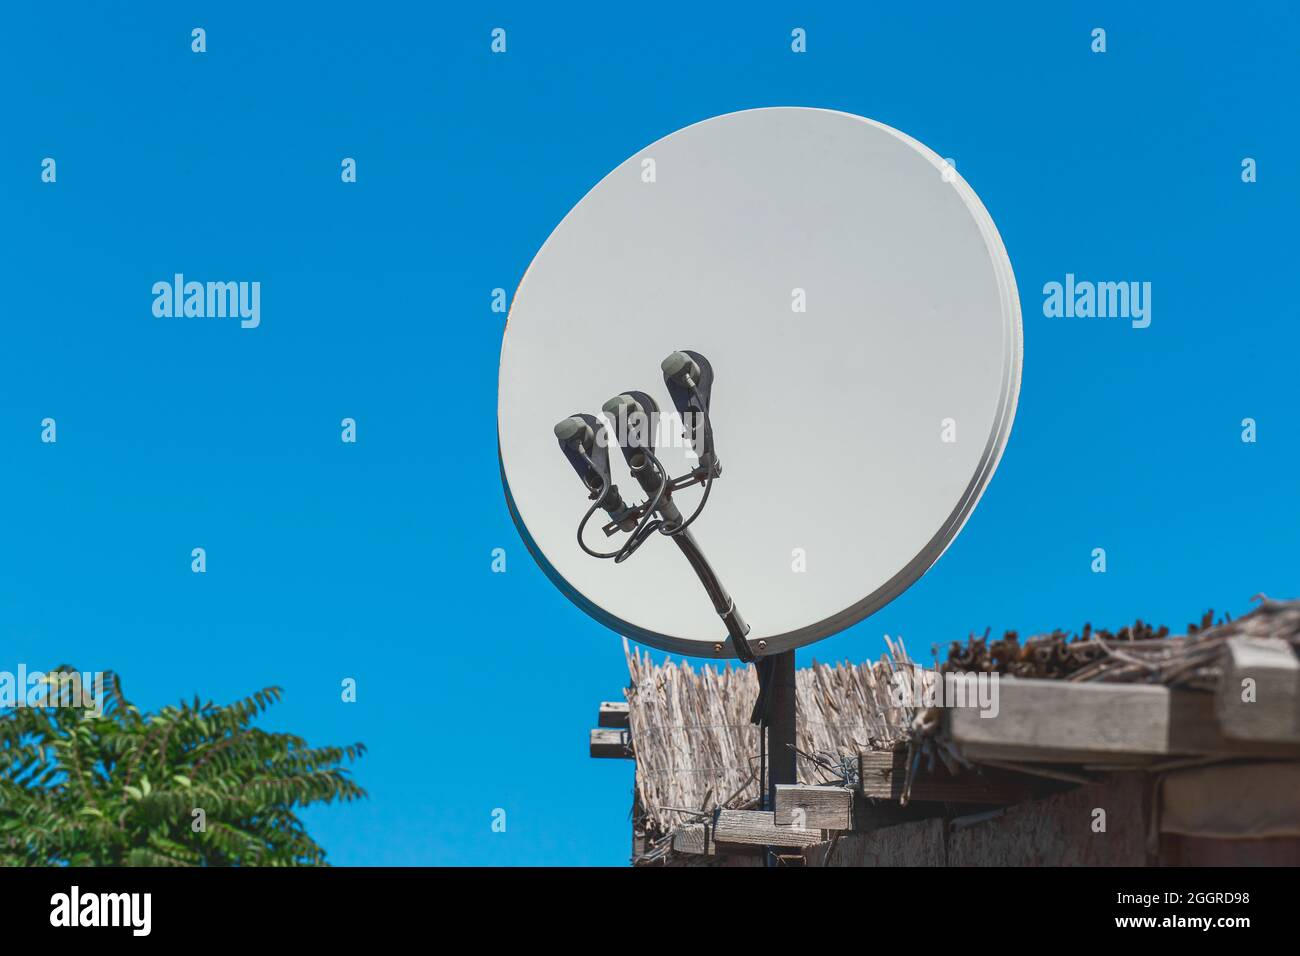 Satellite dish antenna communication and tv signal technology on the roof of the house against the background of blue sky. Stock Photo